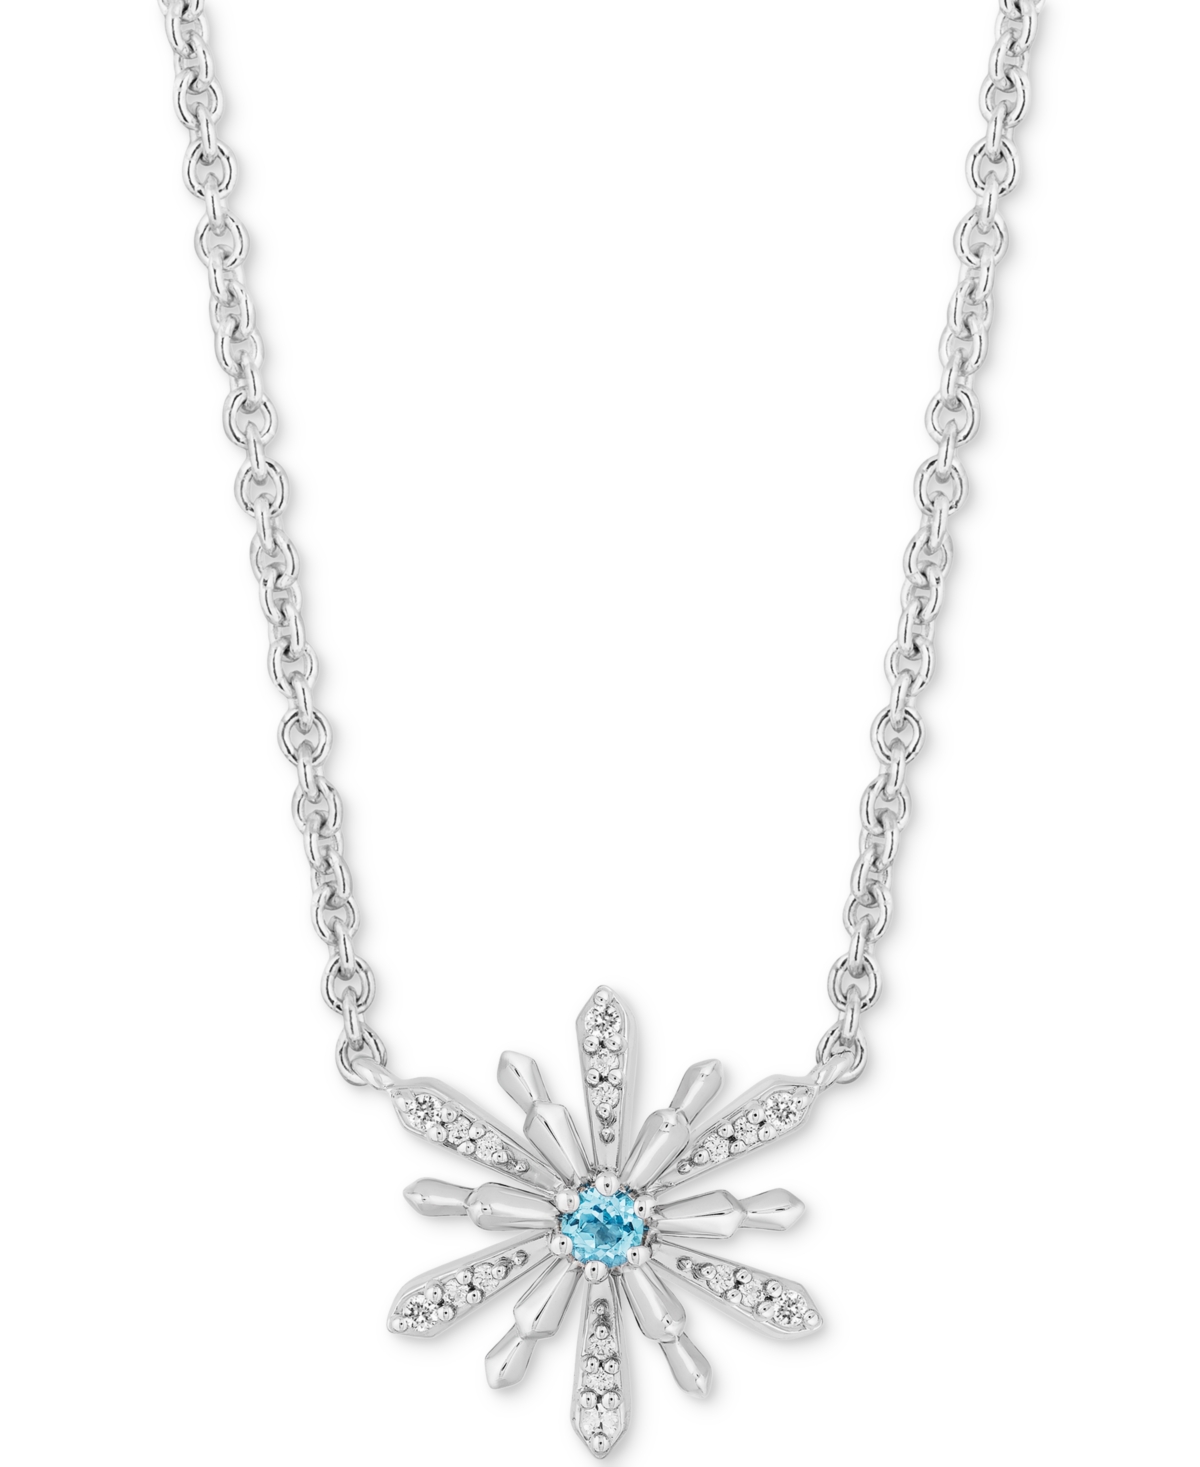 Aquamarine (1/10 ct. t.w.) & Diamond (1/10 ct. t.w.) Elsa Snowflake Pendant Necklace in Sterling Silver, 16" + 2" extend